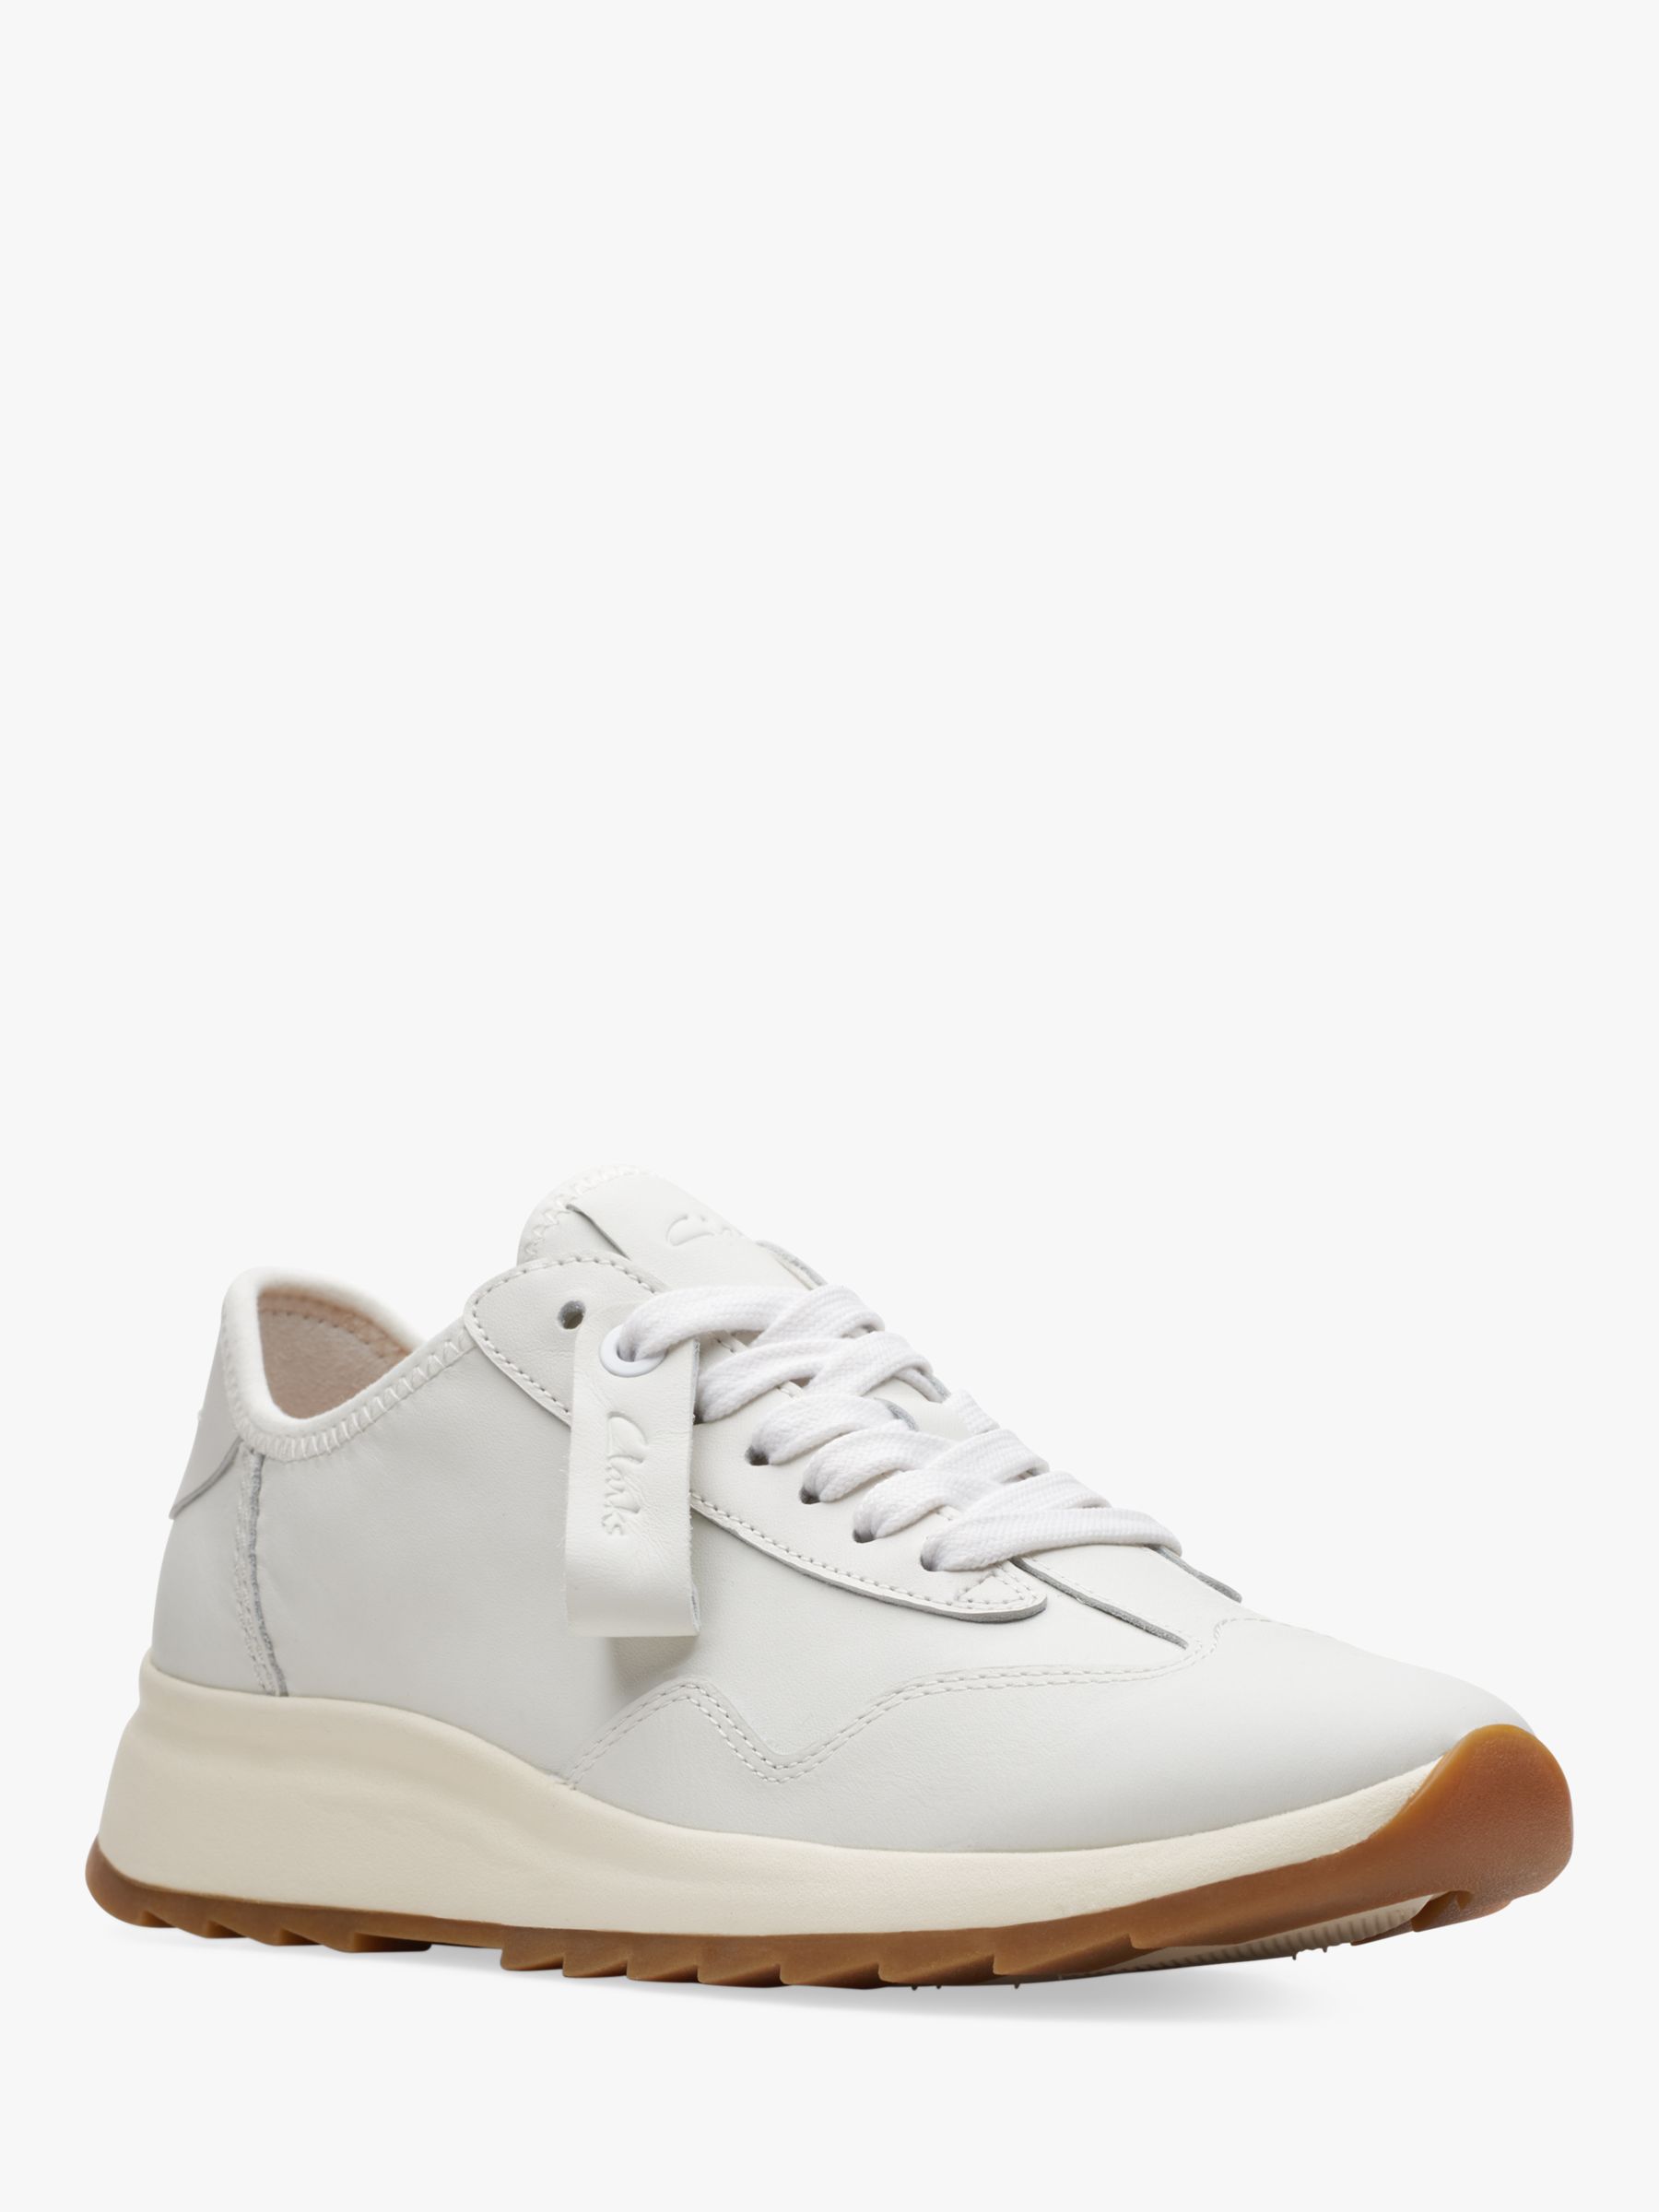 Clarks DashLite Lo Wide Fit Leather Trainers, White at John Lewis ...